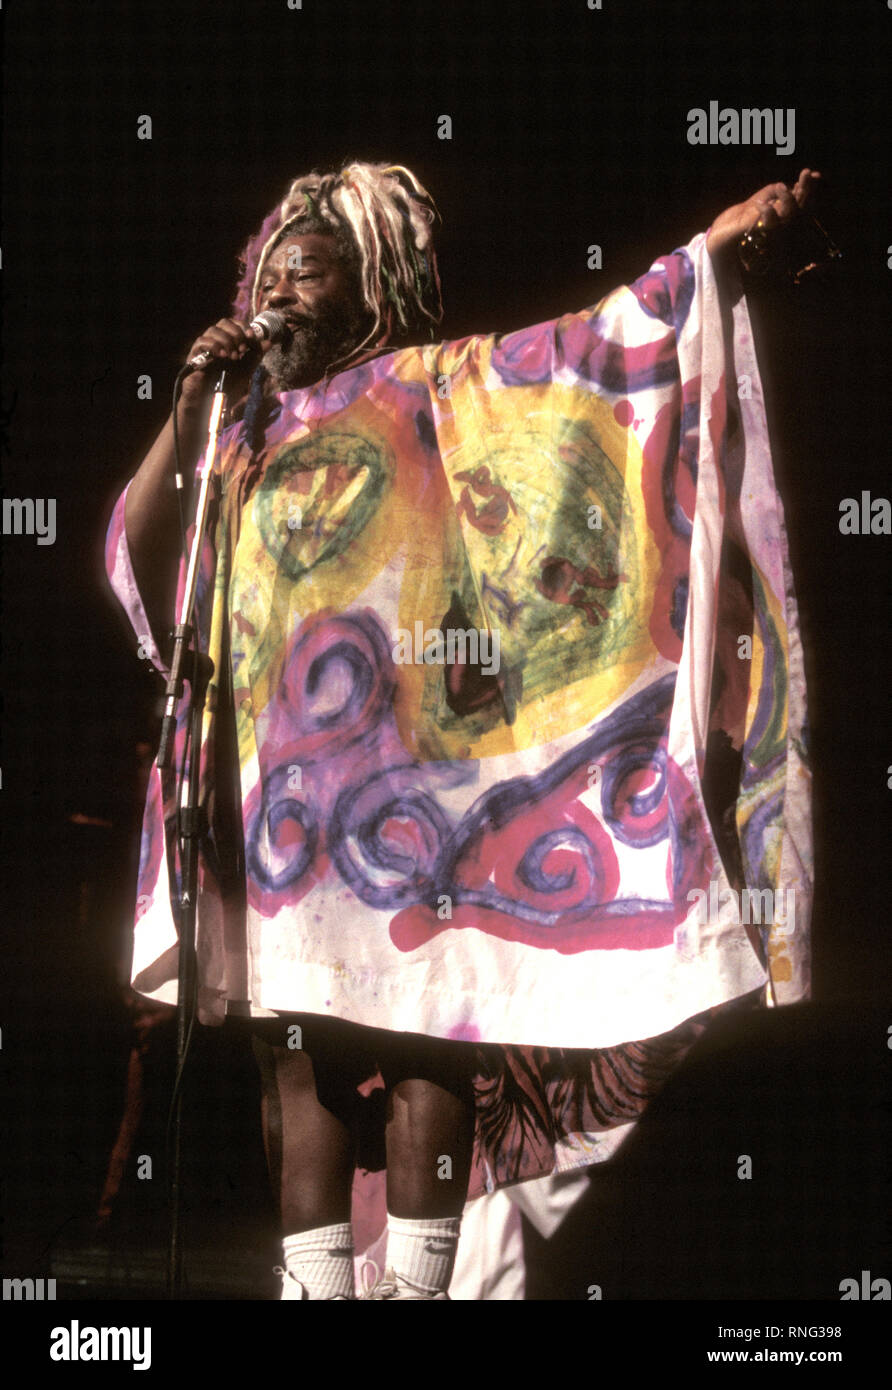 Musician, principal architect and mastermind of the bands Parliament and Funkadelic, George Clinton is shown performing onstage during Woodstock '99. Stock Photo